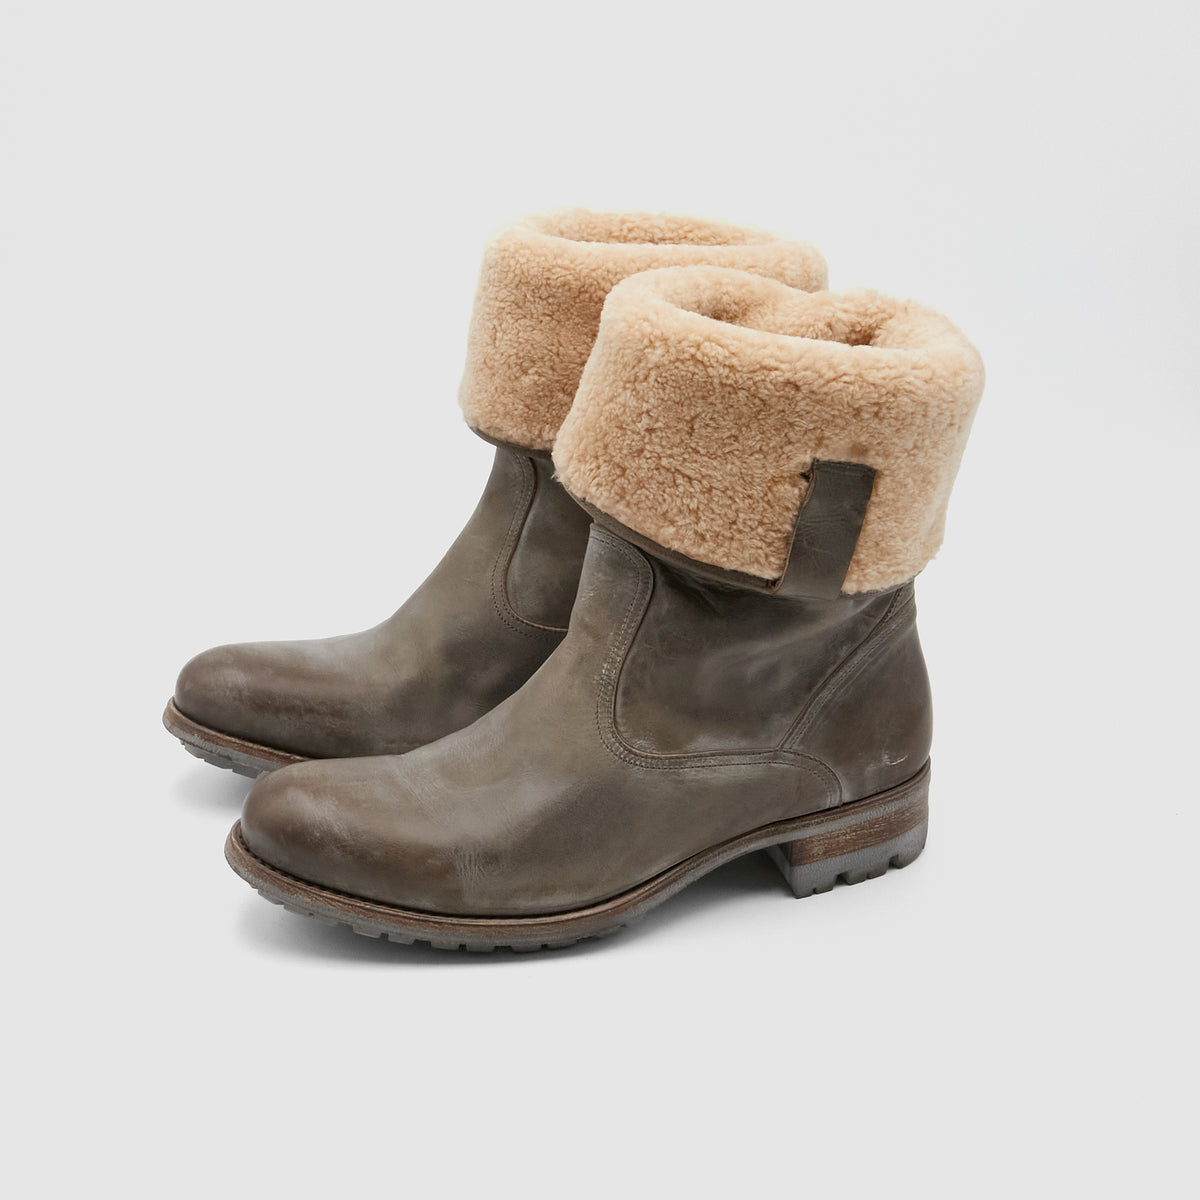 n.d.c. made by hand Vallee Blanche Barrage Sheep Boots